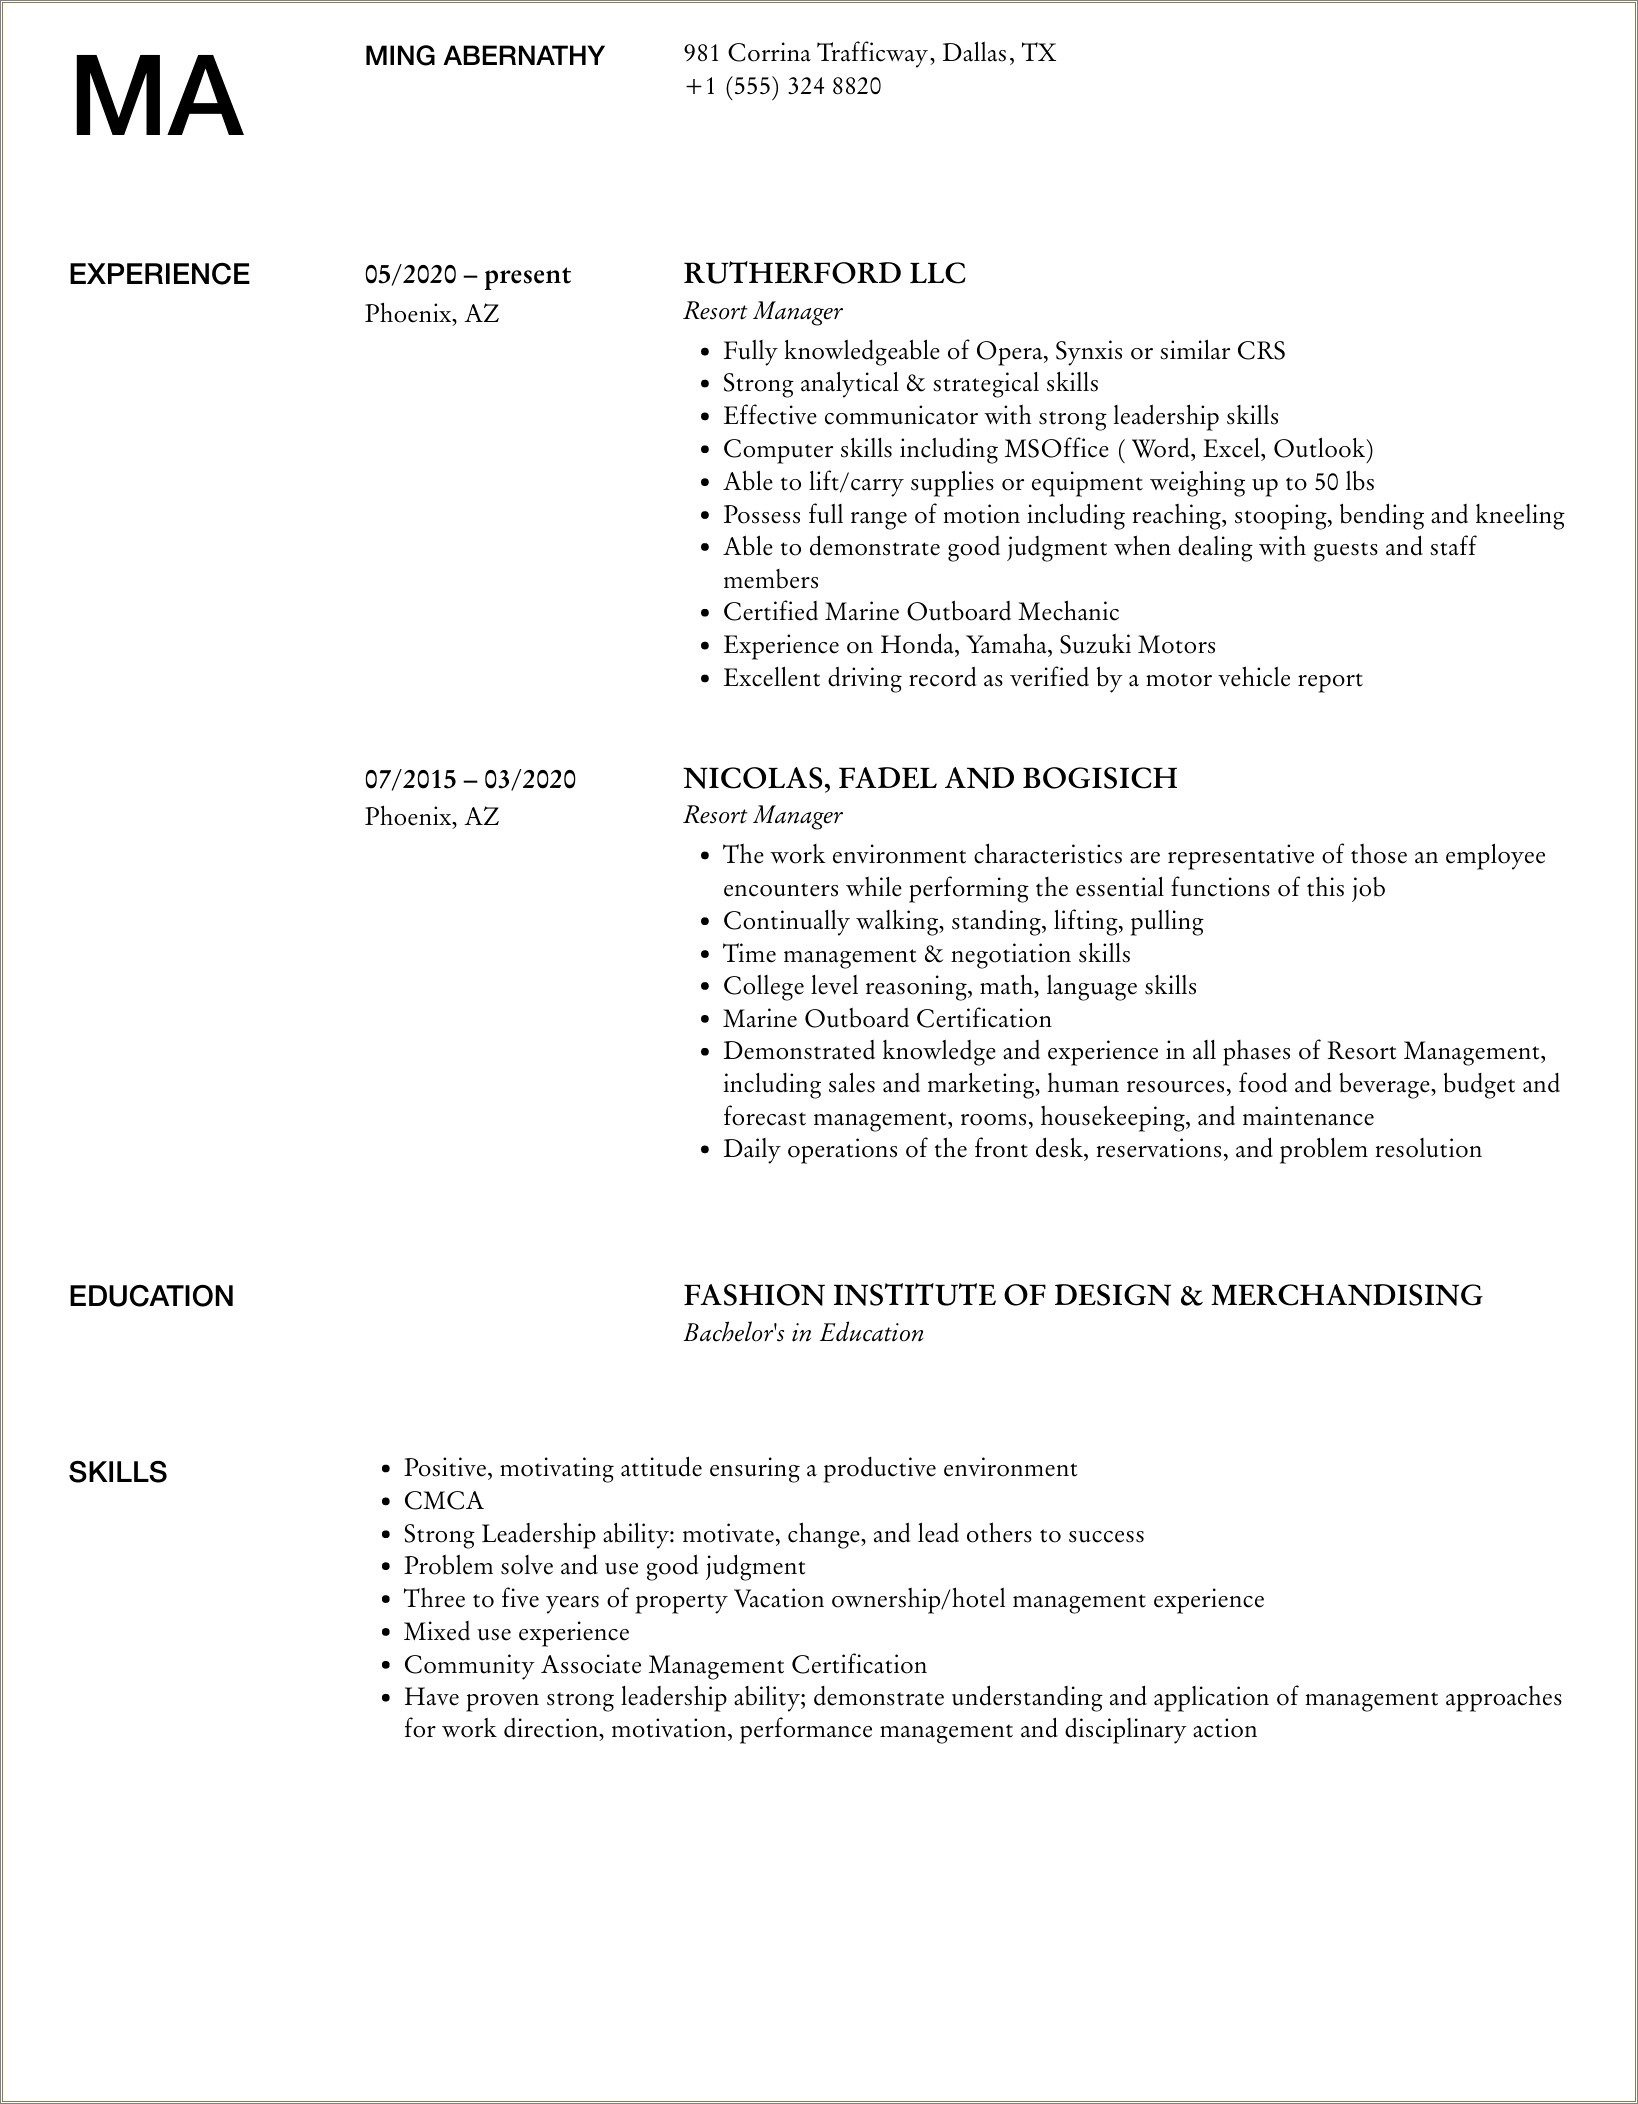 Director Of Operation Vacation Property Management Resume Description